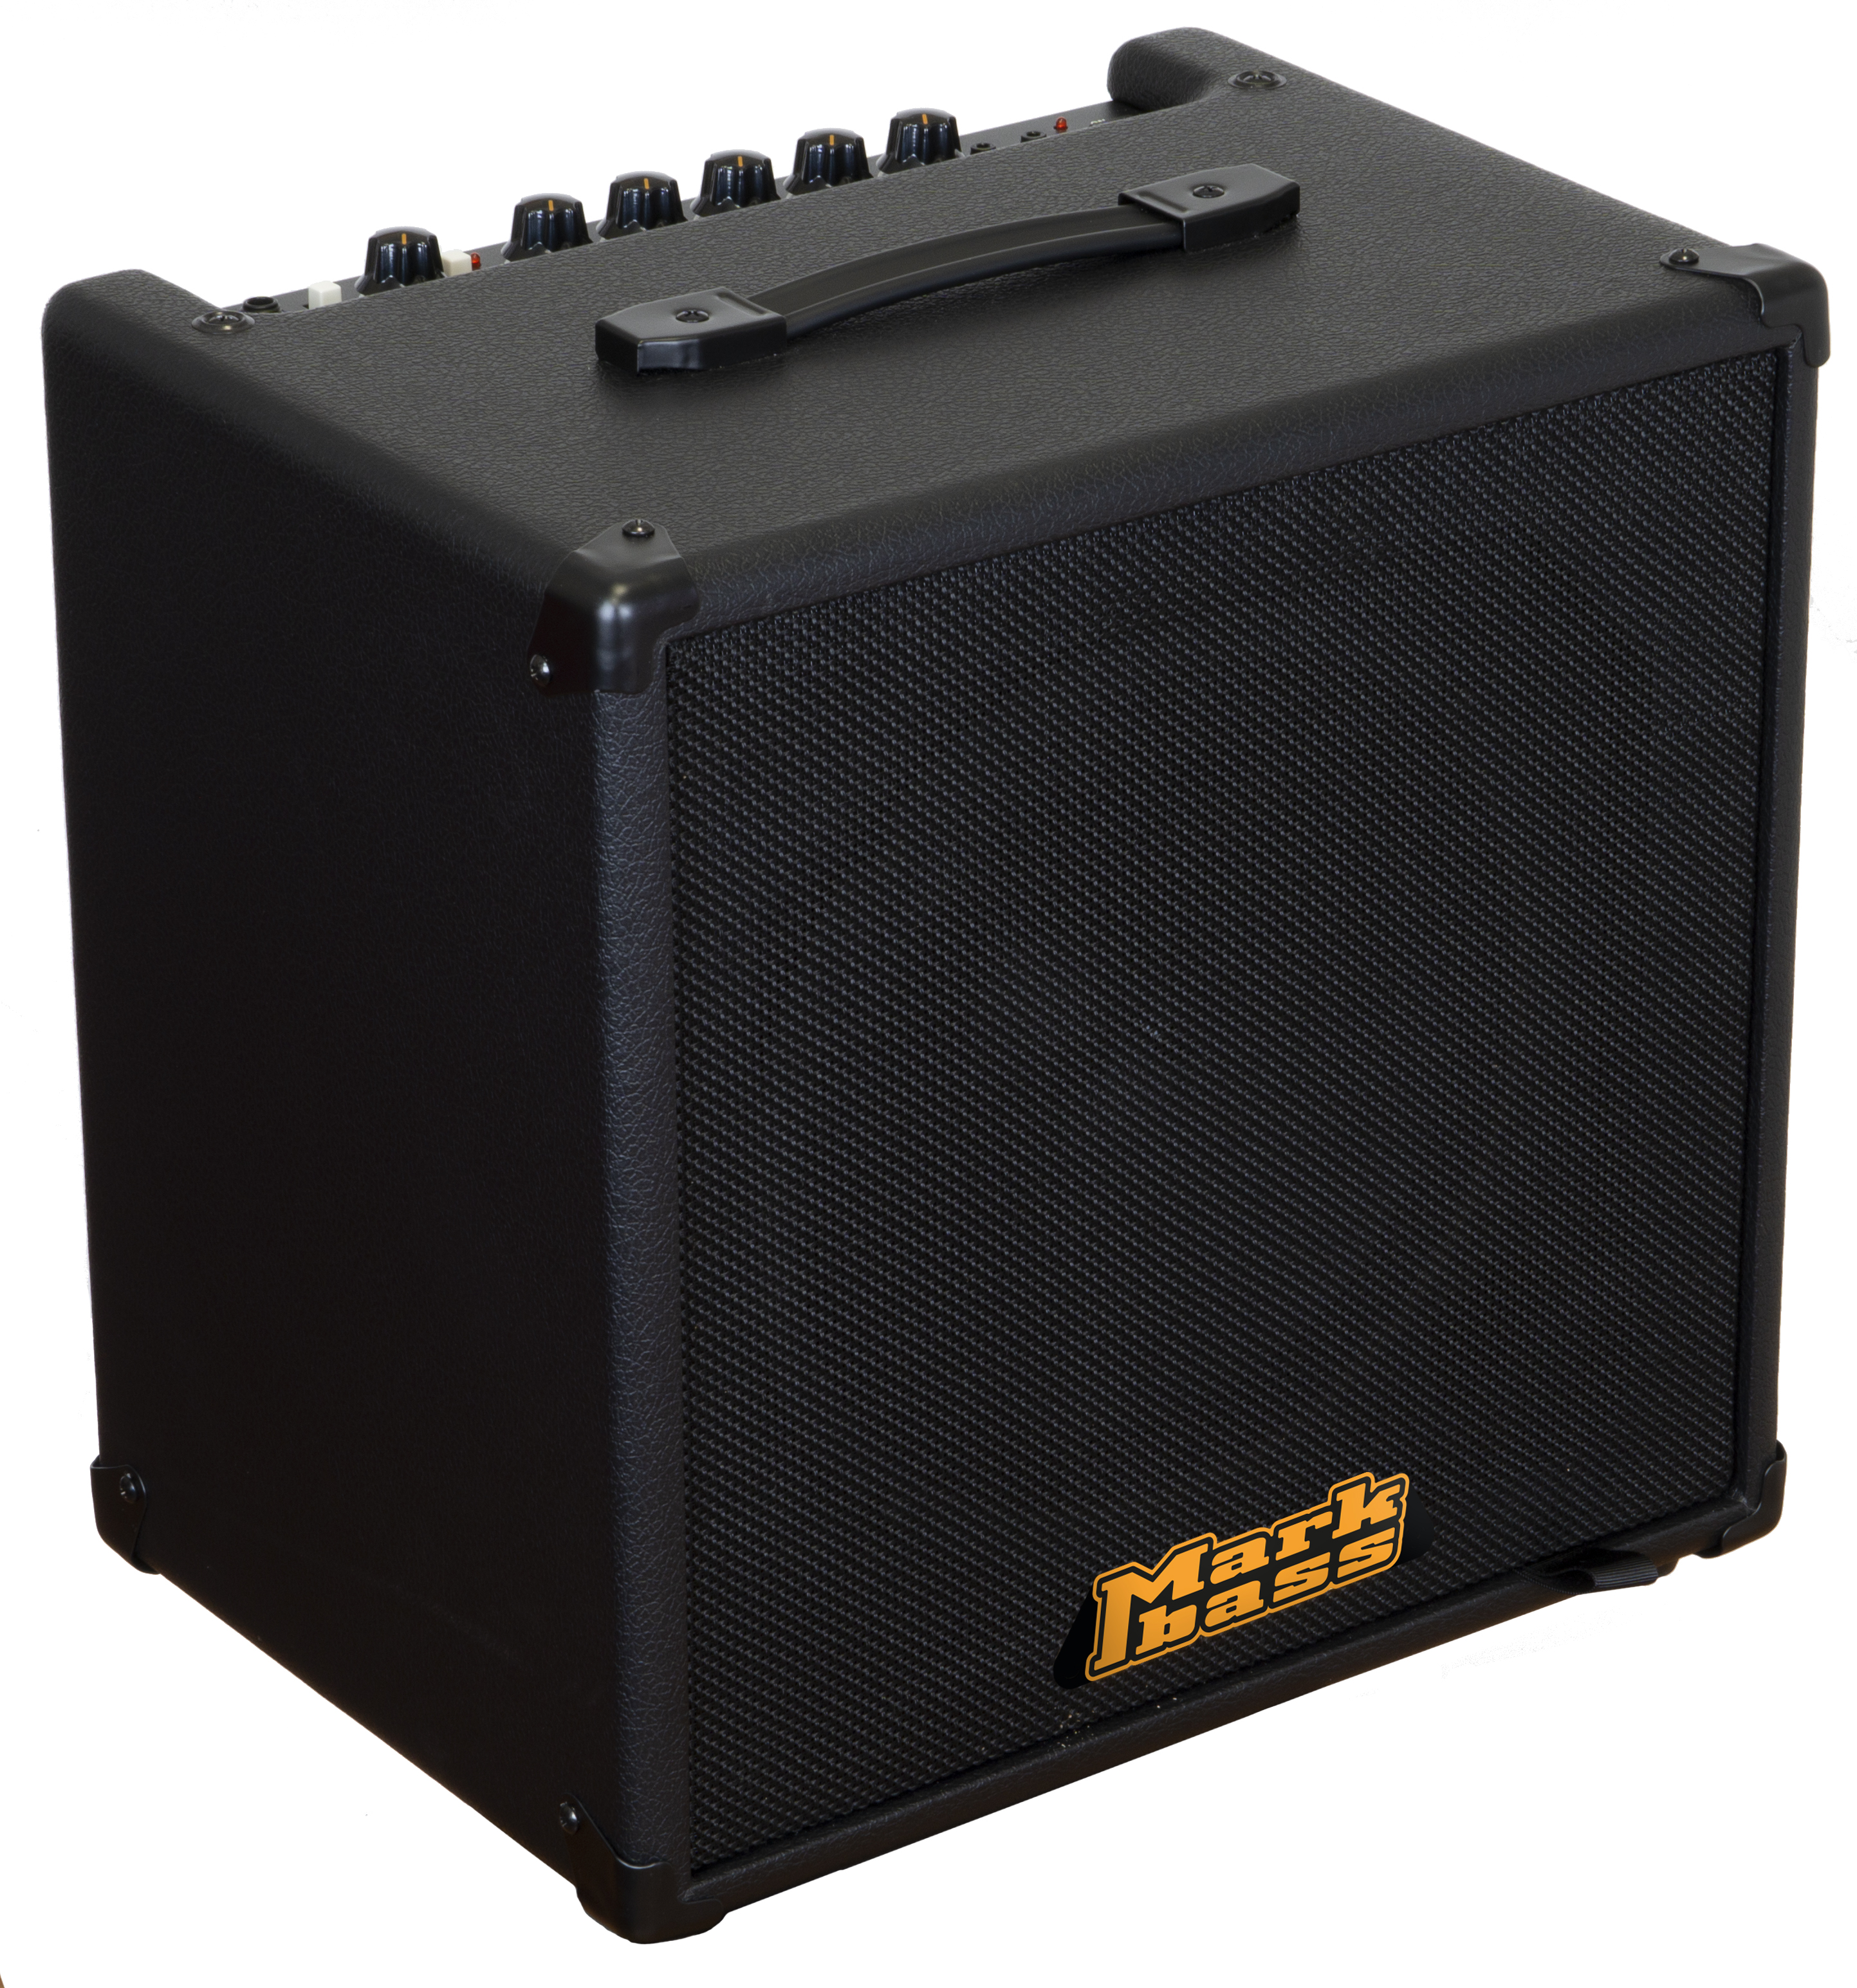 Markbass Cmb 101 Black Line Combo 40w 1x10 - Combo voor basses - Variation 2